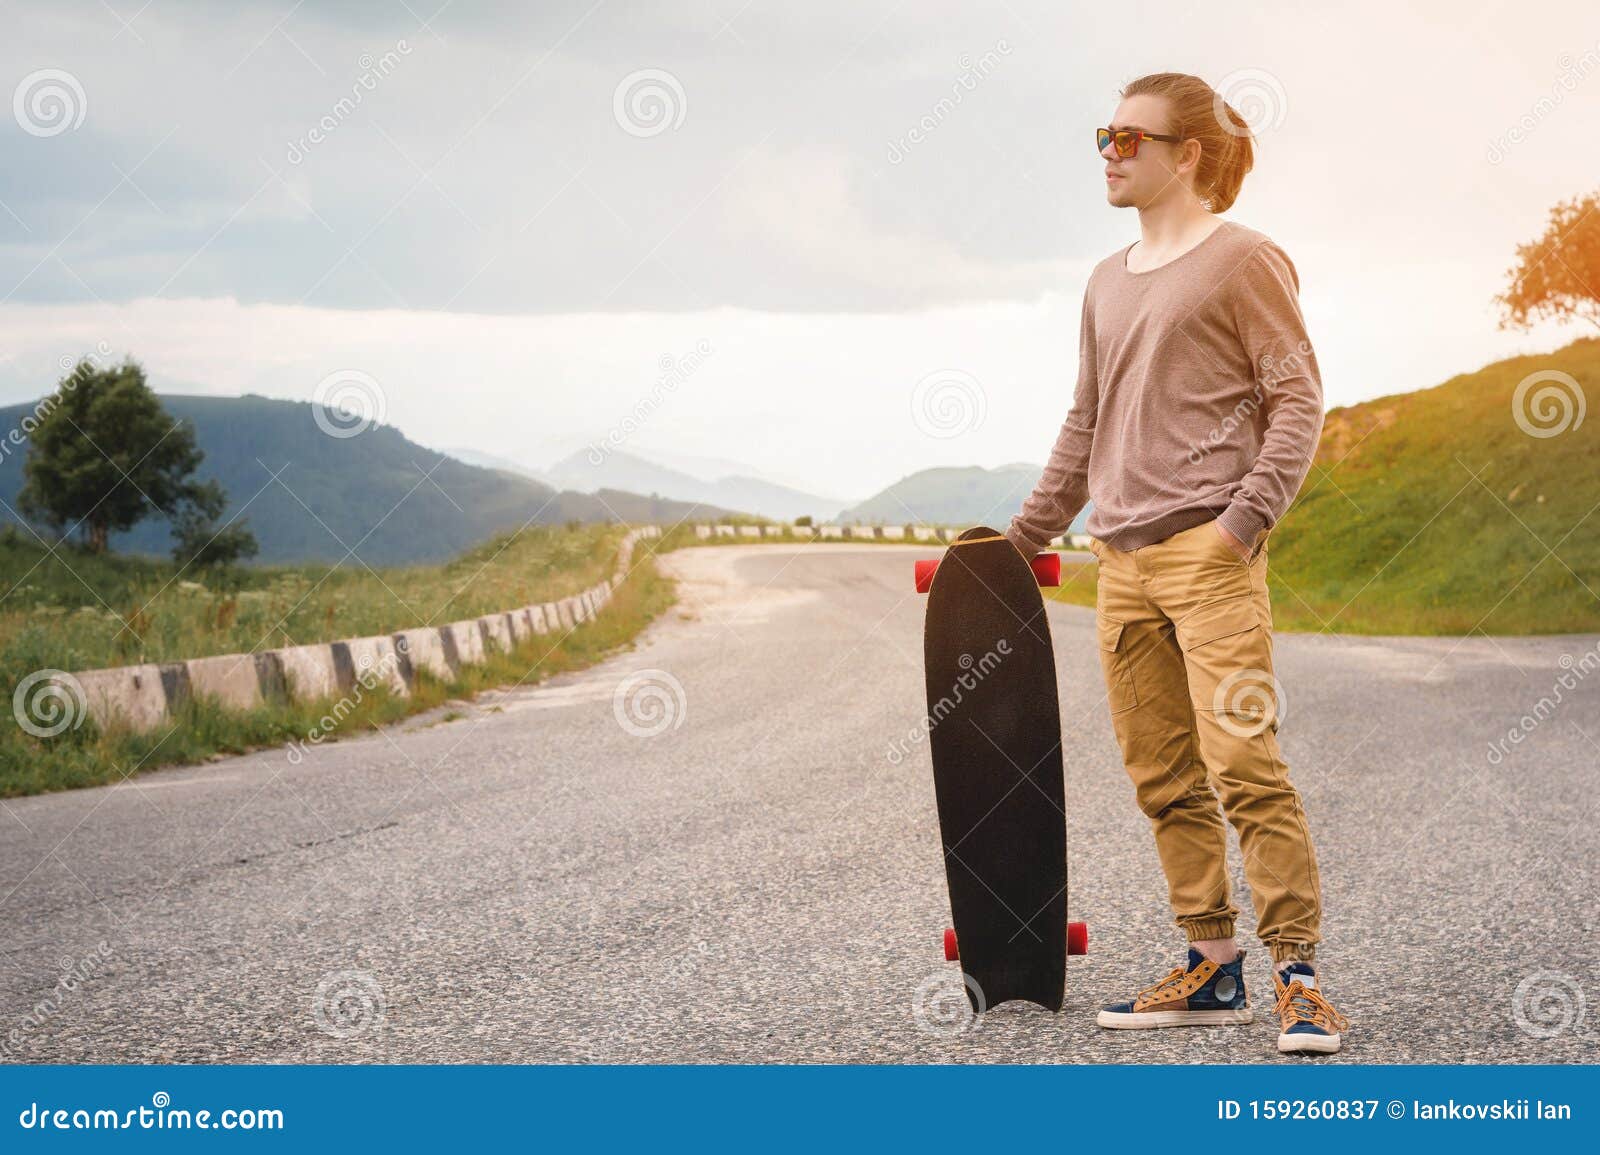 Stylish Young Man Standing Along a Winding Mountain Road with a Skate ...